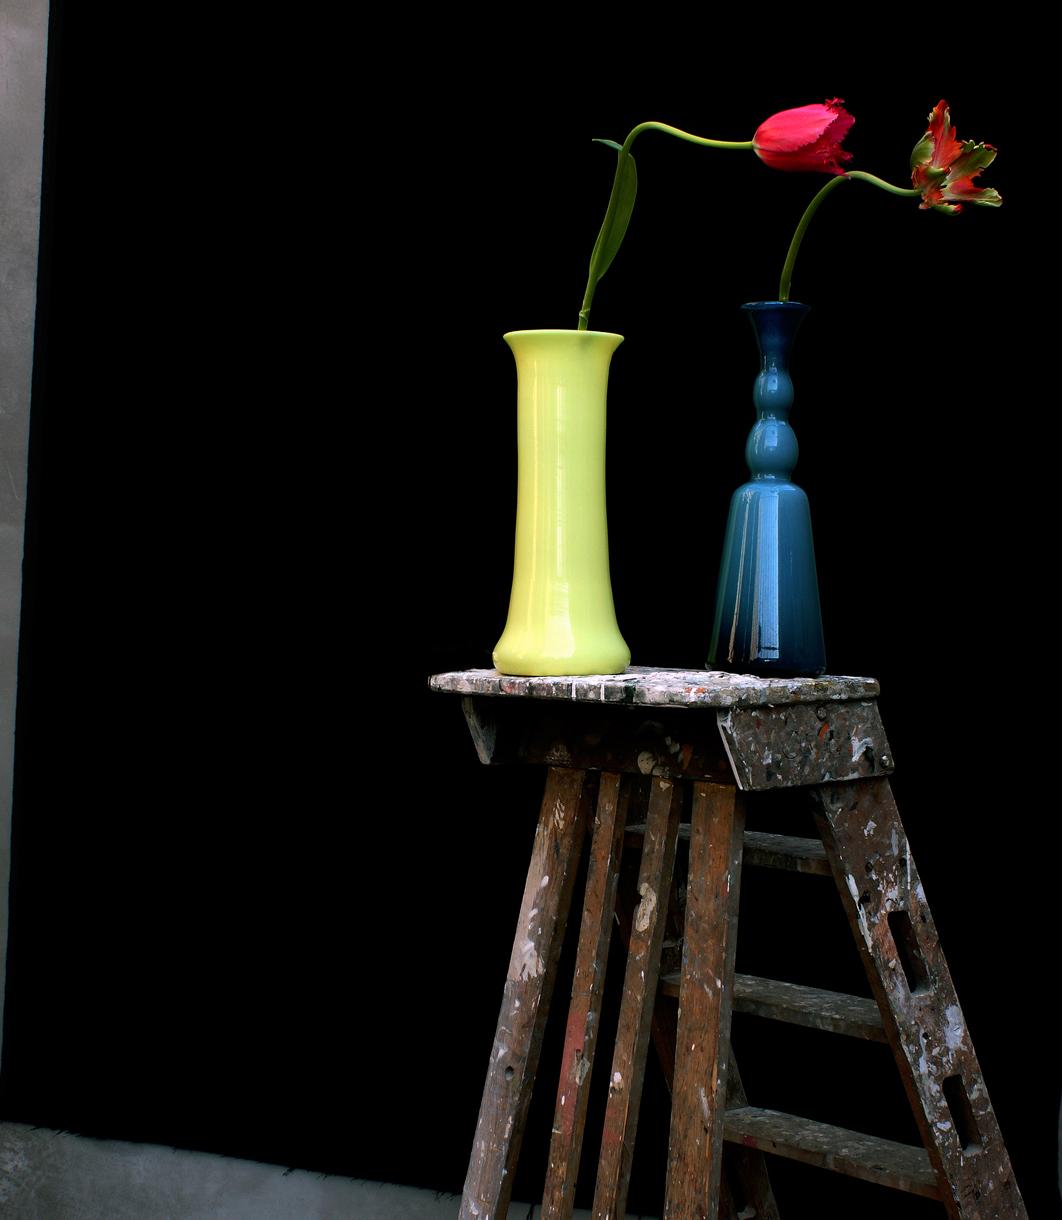 Still life with Tulips, a Ladder and a Yellow Opalina Vase, Antwerp, Color Photo - Contemporary Photograph by Michael James O’Brien